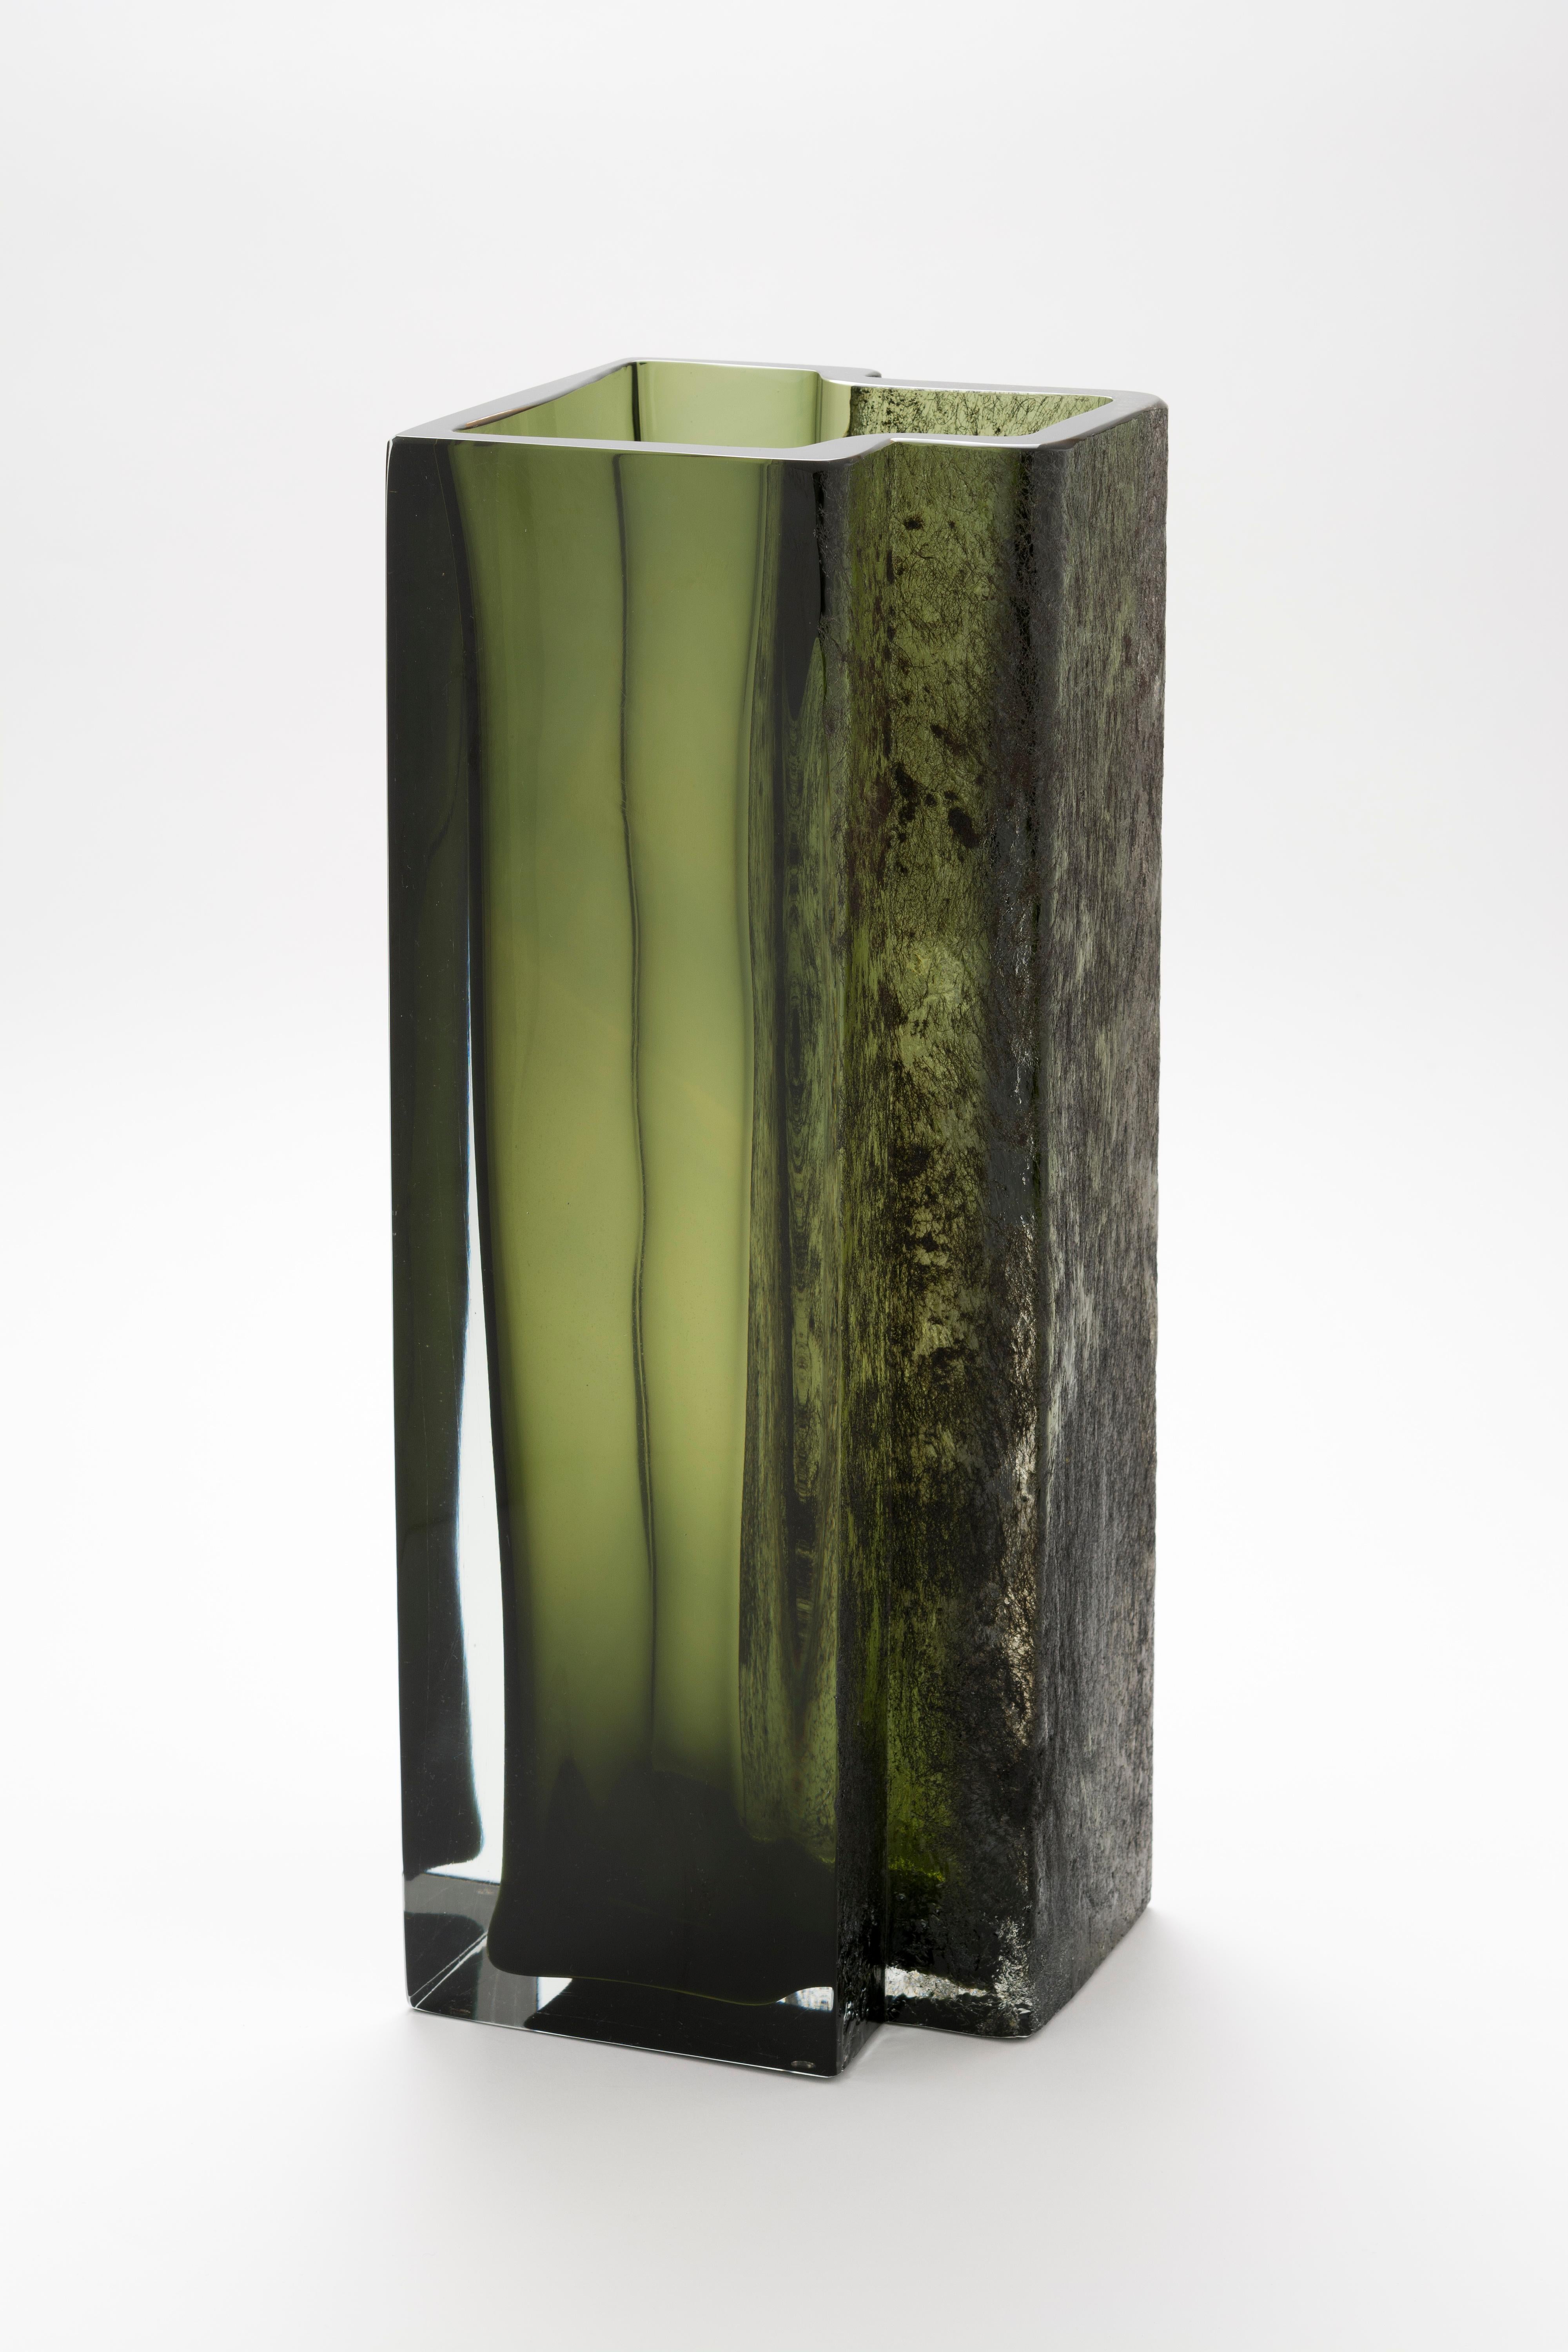 Eurytmia vase by Paolo Marcolongo
Dimensions: 15.7 x 16.2 x H 42 cm 
Materials: Murano glass and iron. 


Paolo Marcolongo was born in Padua in 1956, he attended the Art High School 